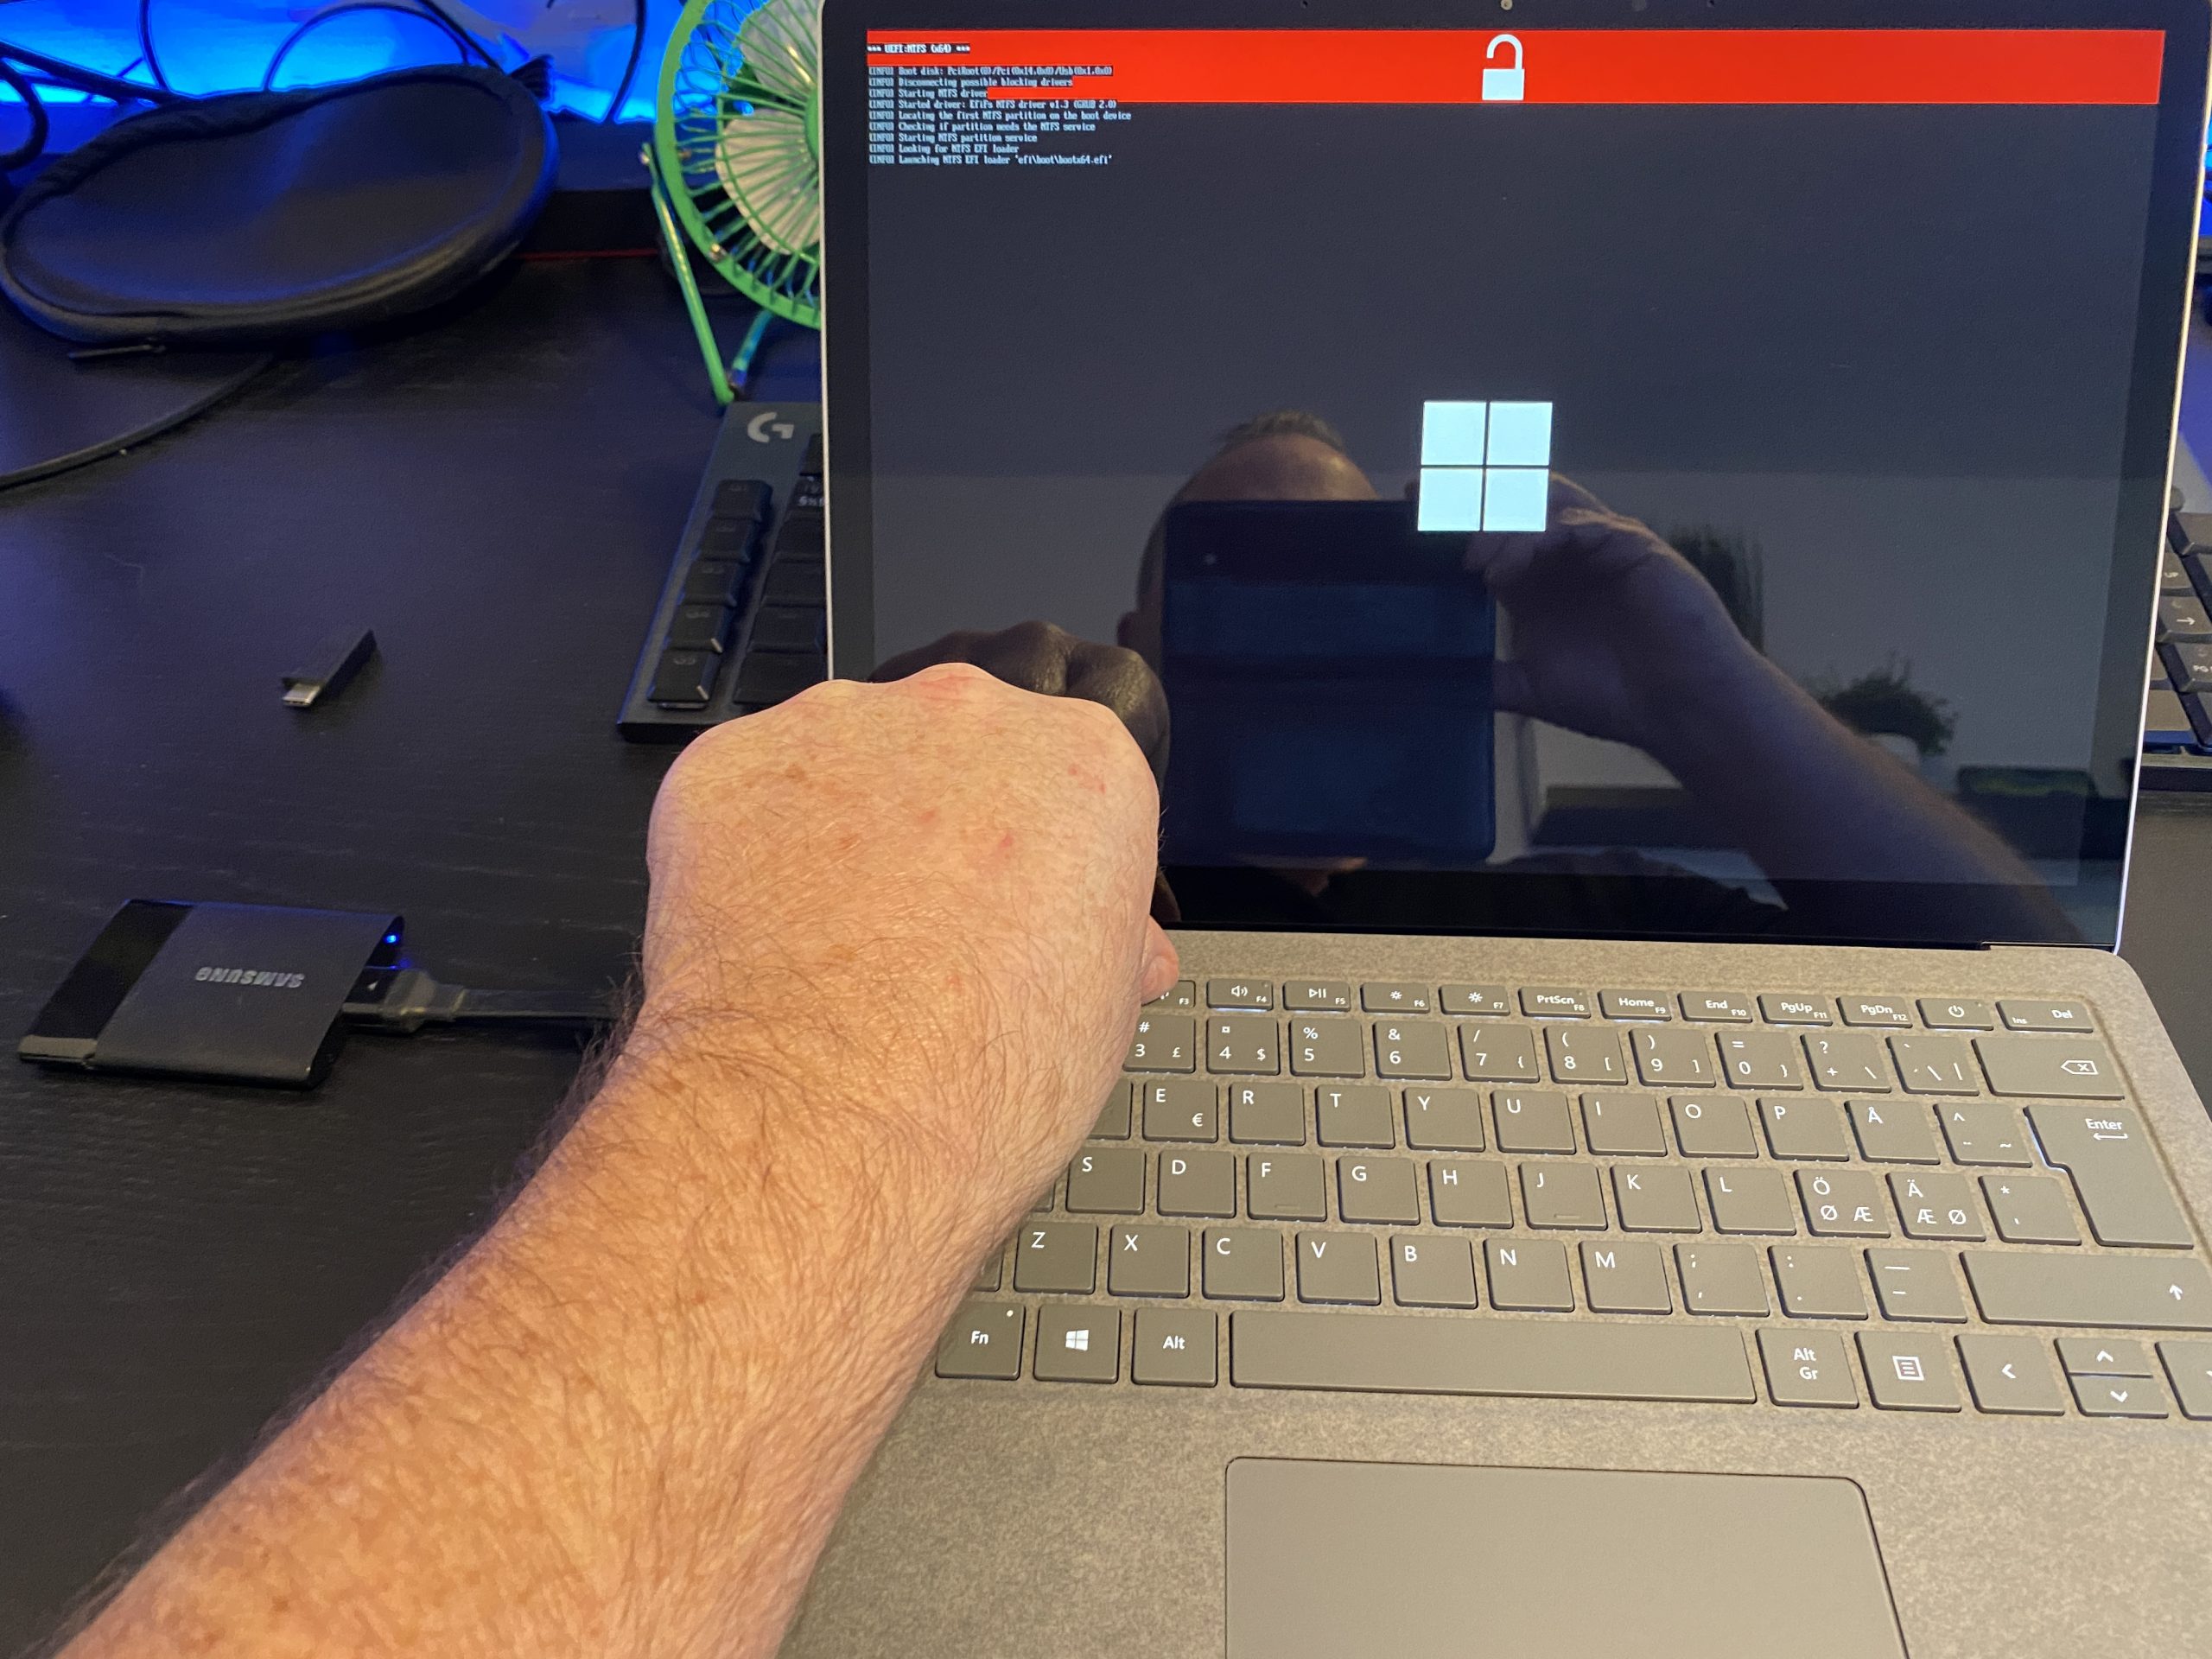 How USB boot a Microsoft Surface Laptop 4 | just another windows ?